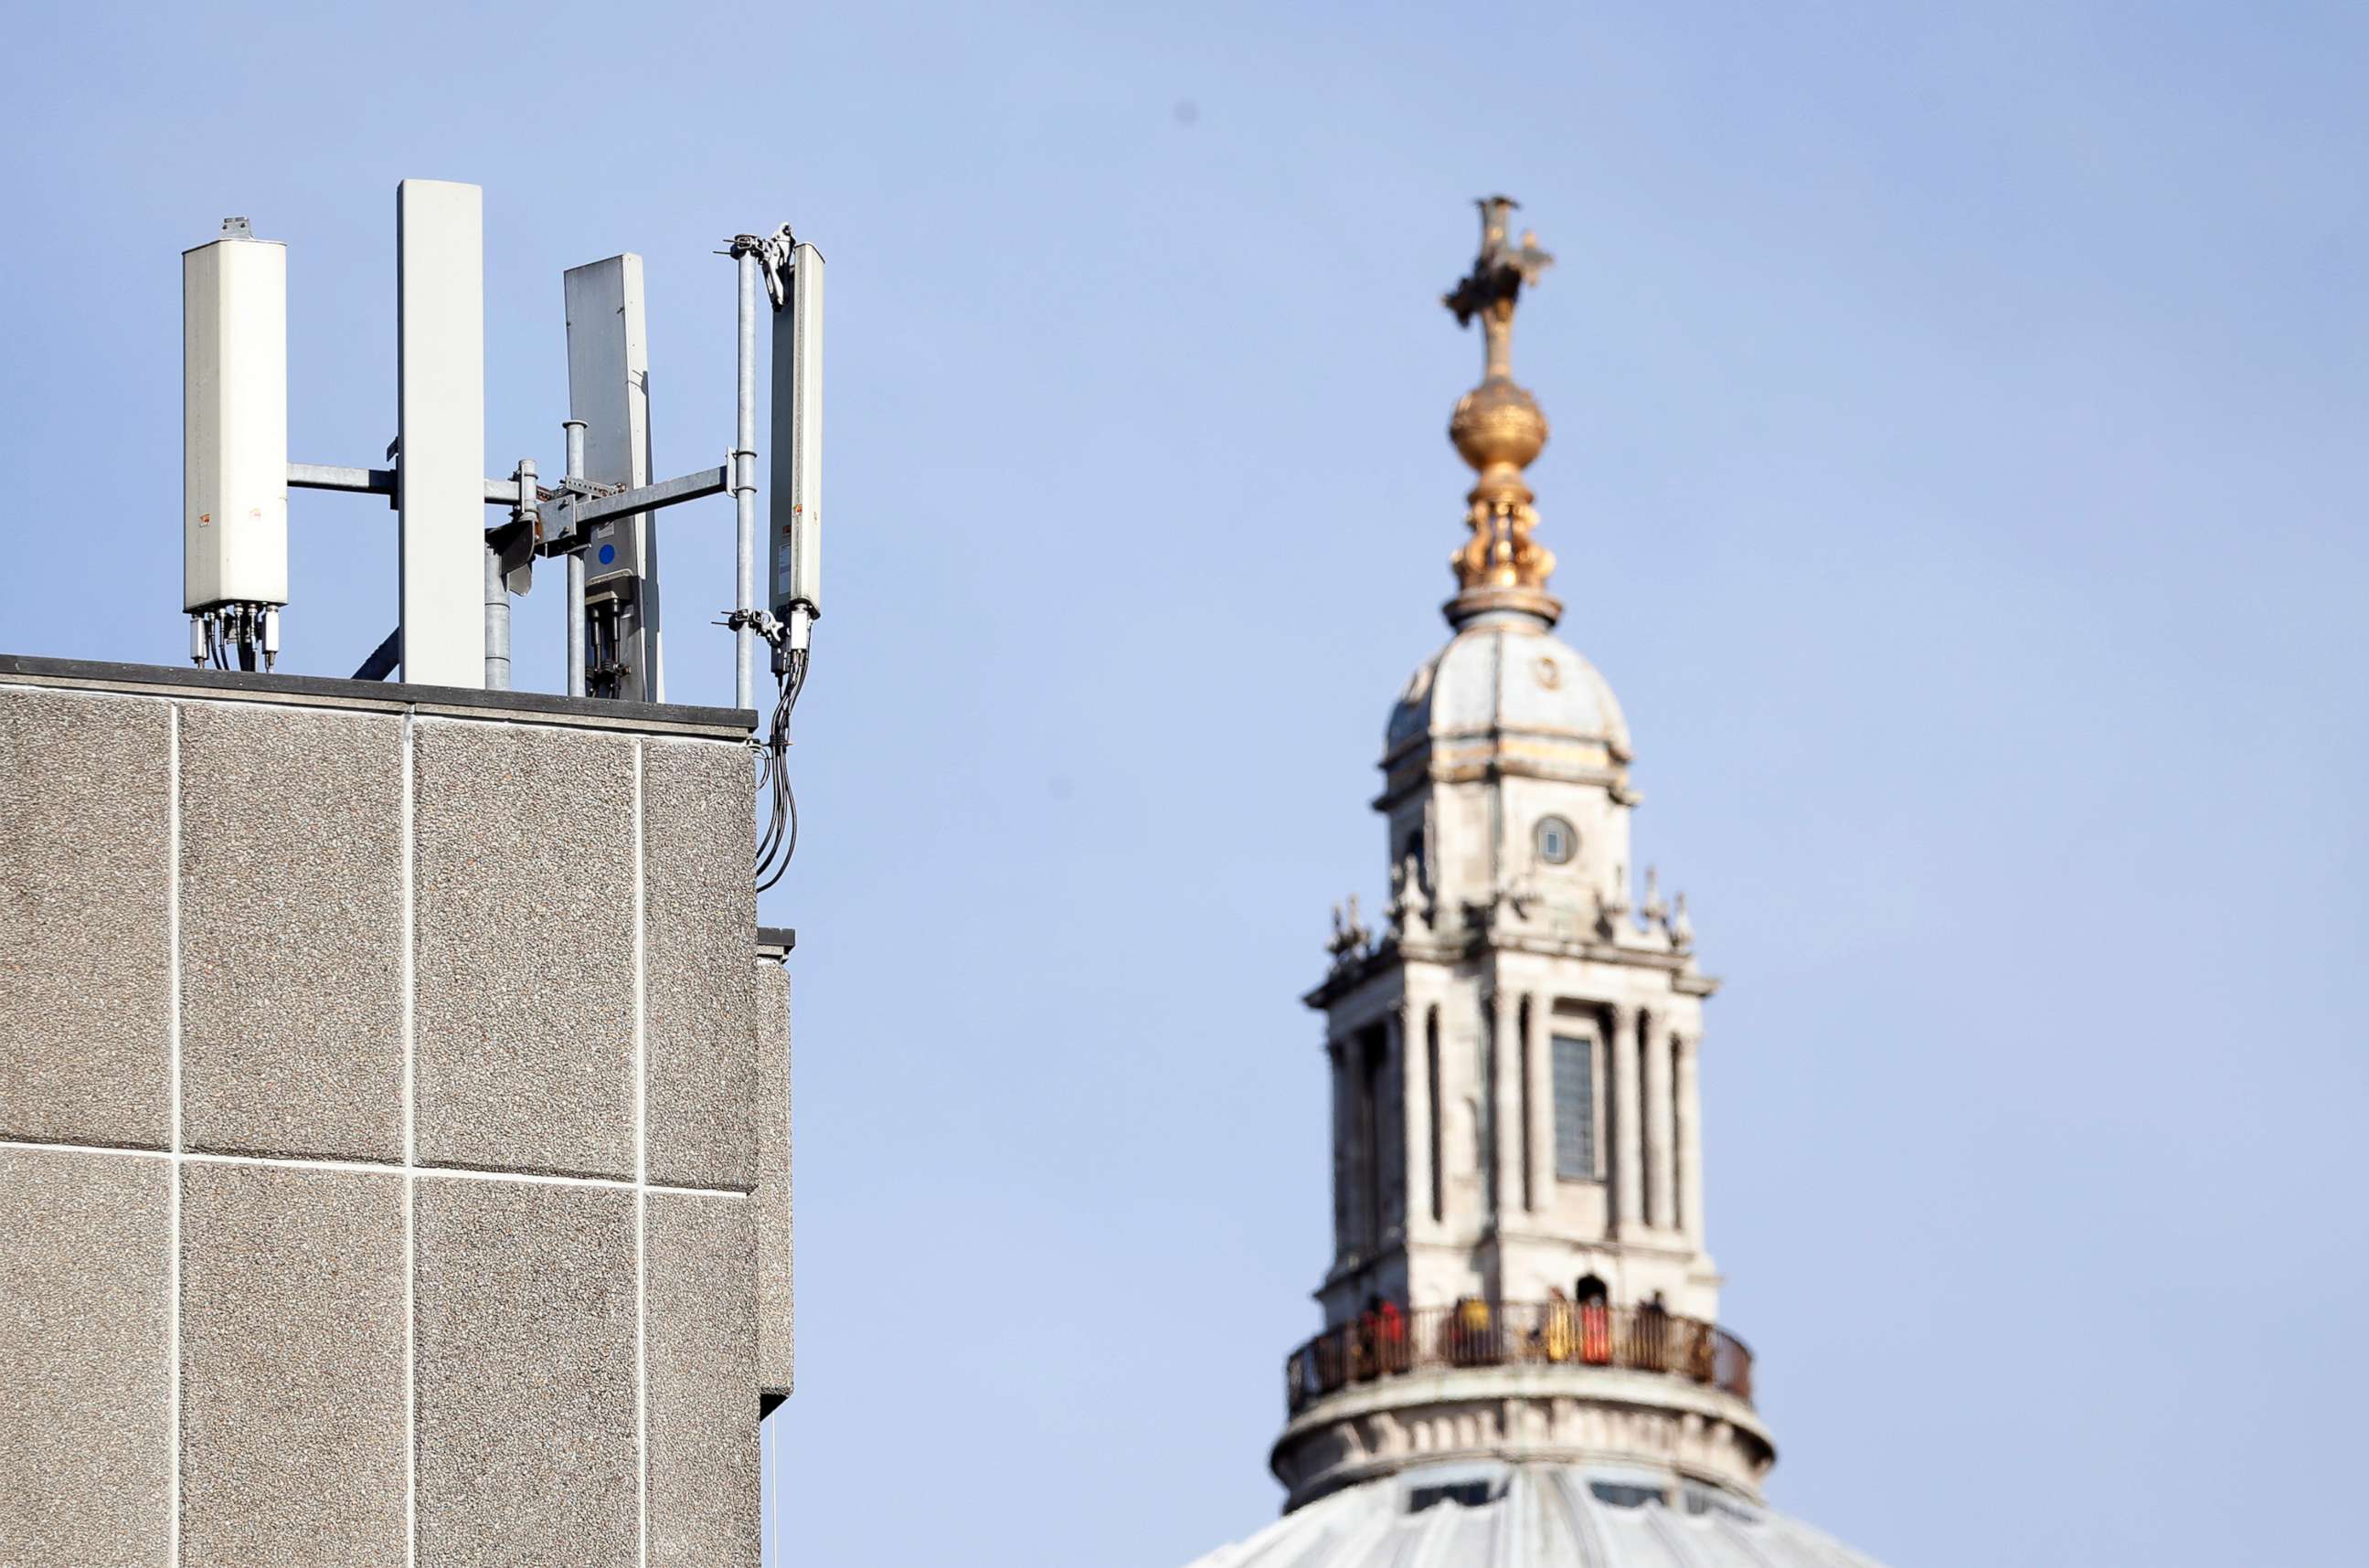 PHOTO: In this Jan 28, 2020 file photo, mobile network phone masts are visible in front of St Paul's Cathedral in the City of London.